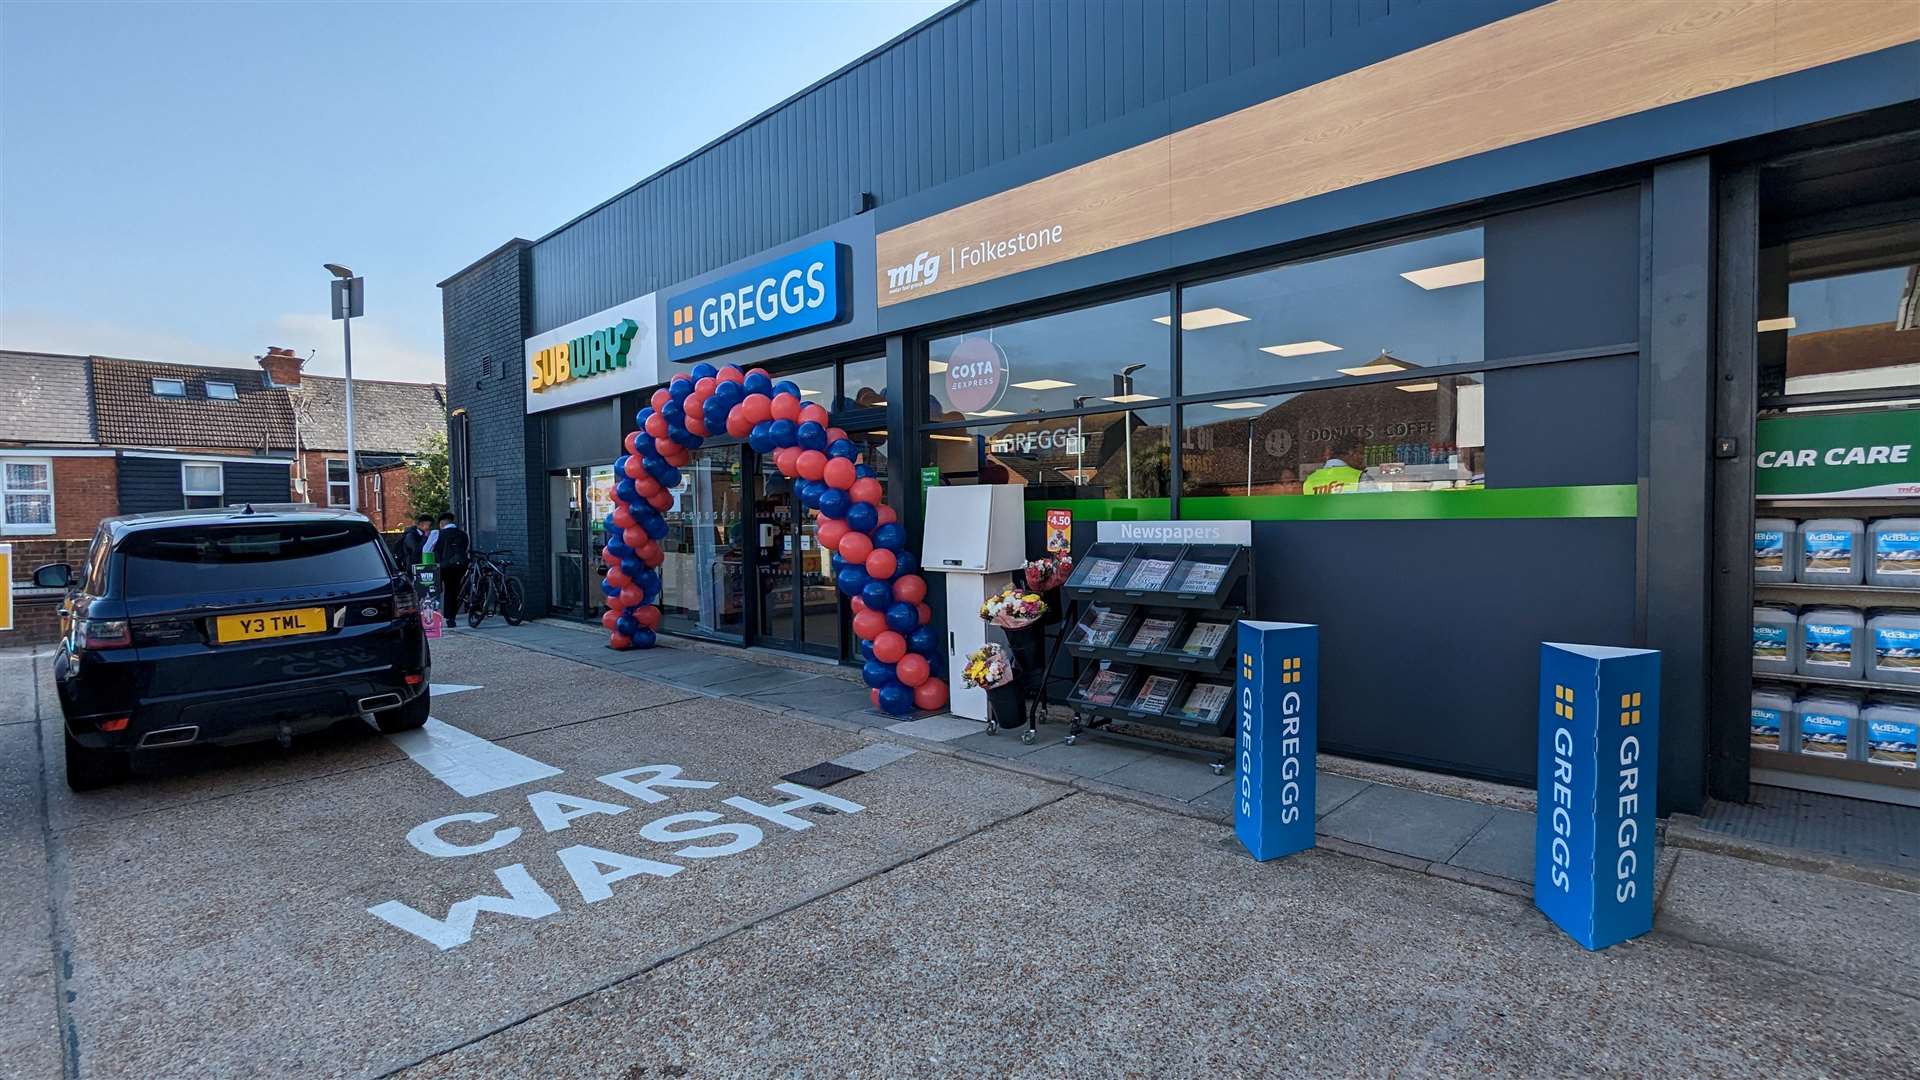 A new Greggs has opened in a Kent town today – the first branch of the chain in the area.